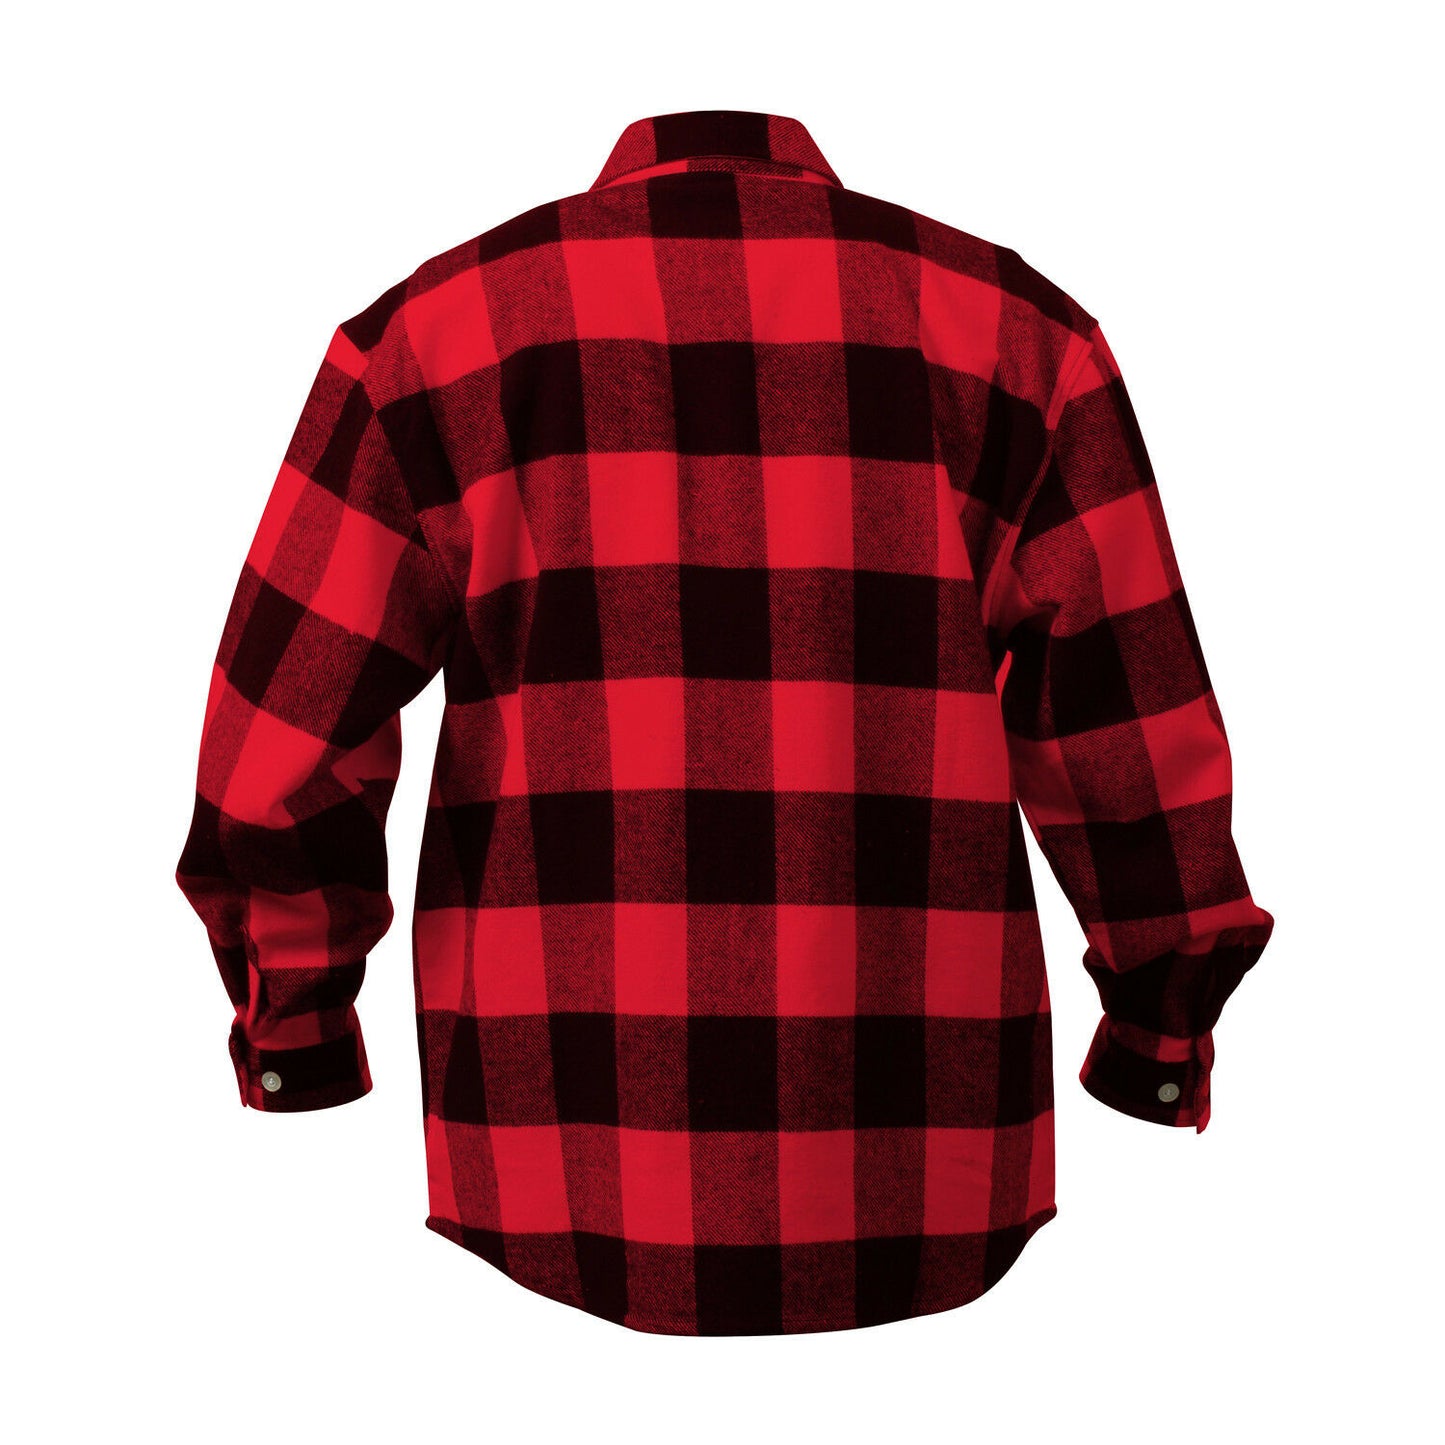 Rothco Concealed Carry Flannel Shirt - Red and Black